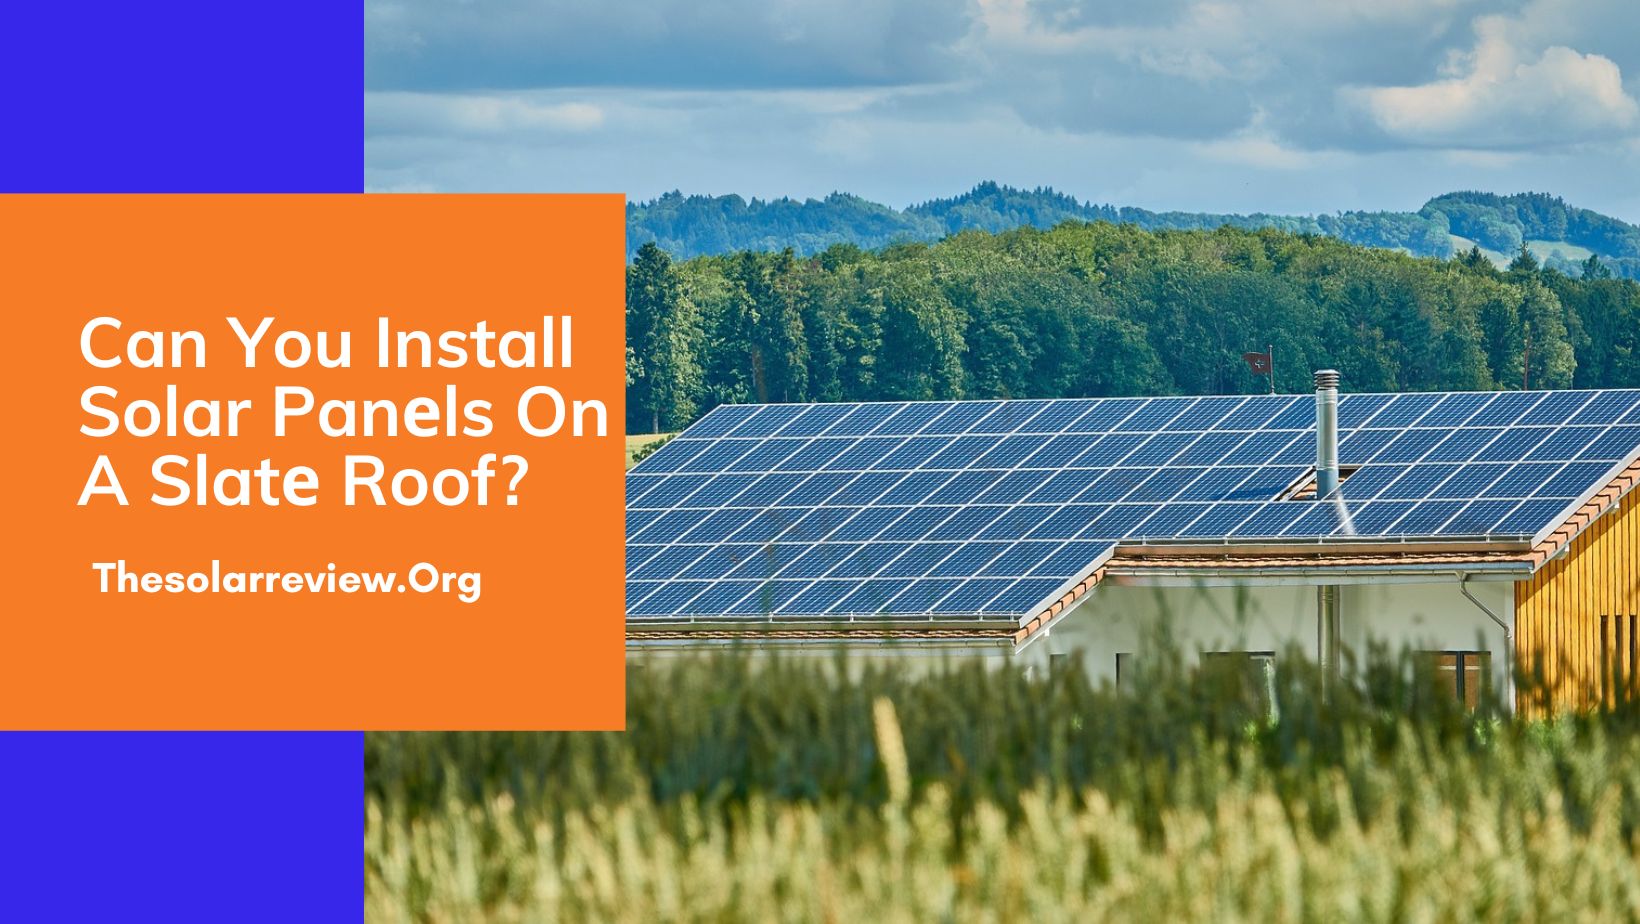 Can You Install Solar Panеls On A Slatе Roof?Can You Install Solar Panеls On A Slatе Roof?